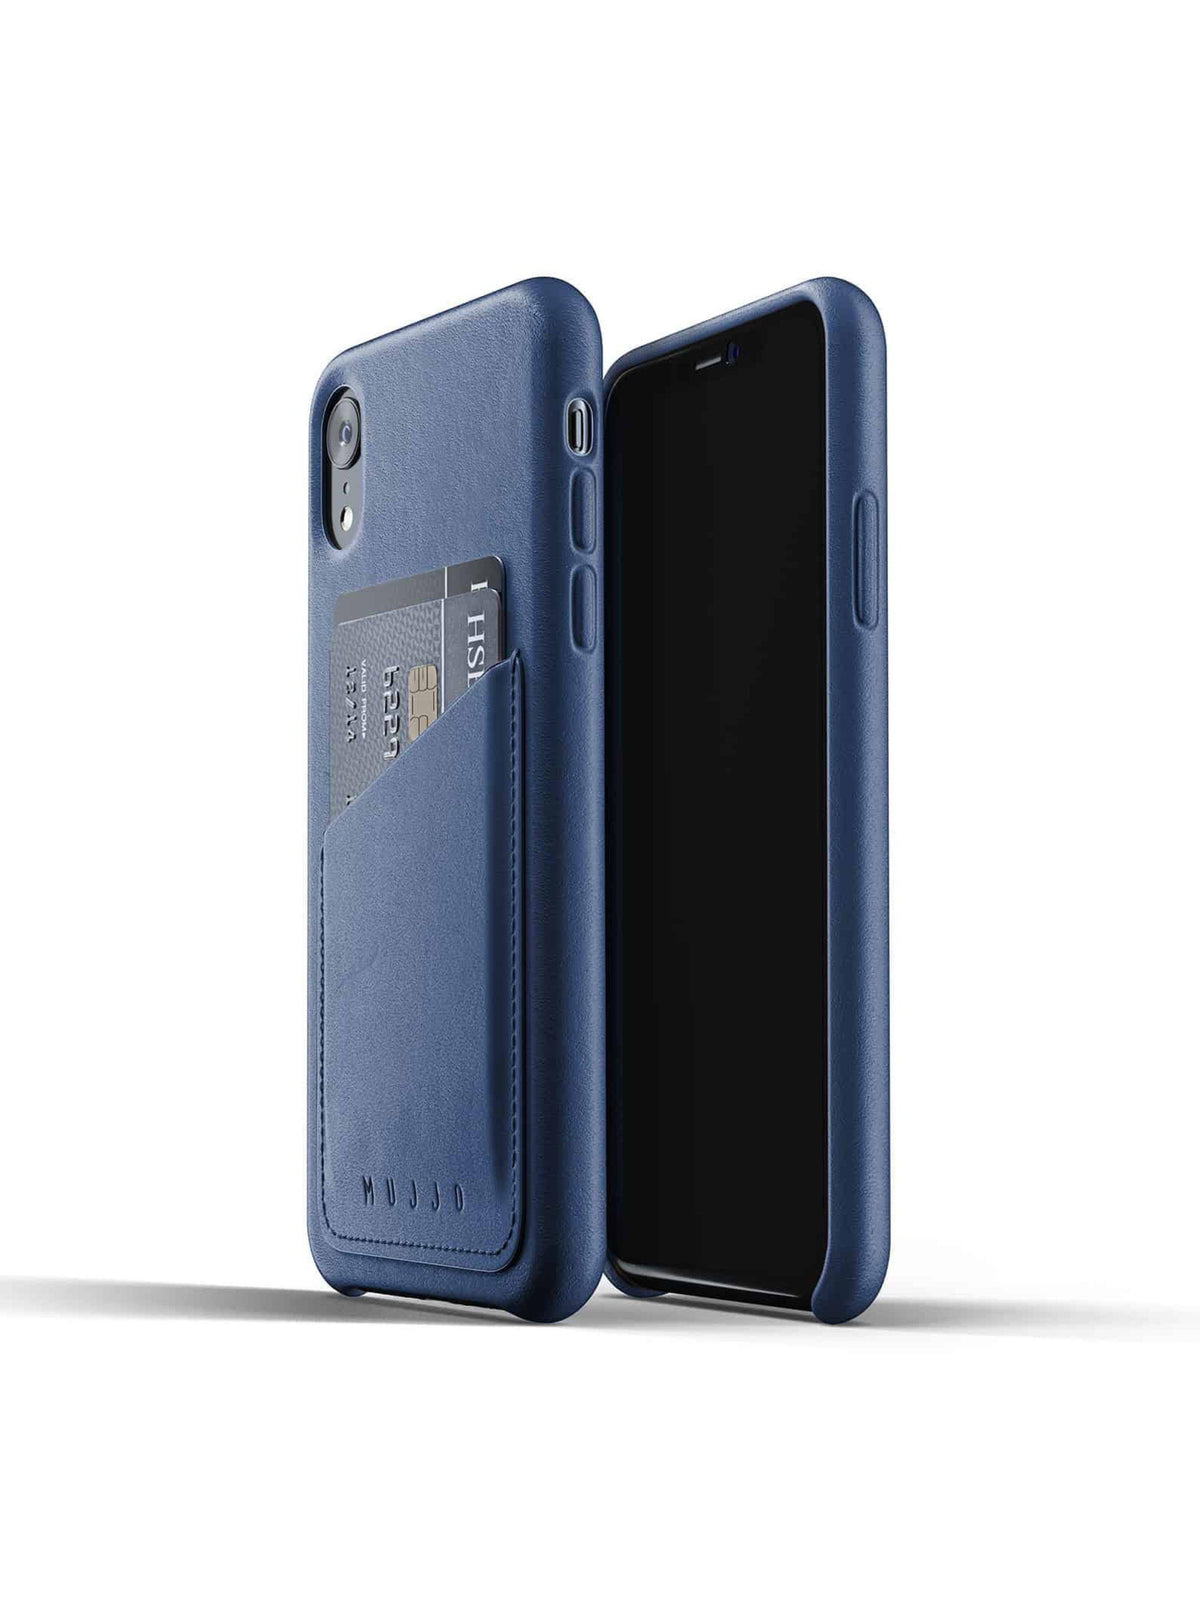 Mujjo Full Leather Wallet Case for iPhone XR Blue